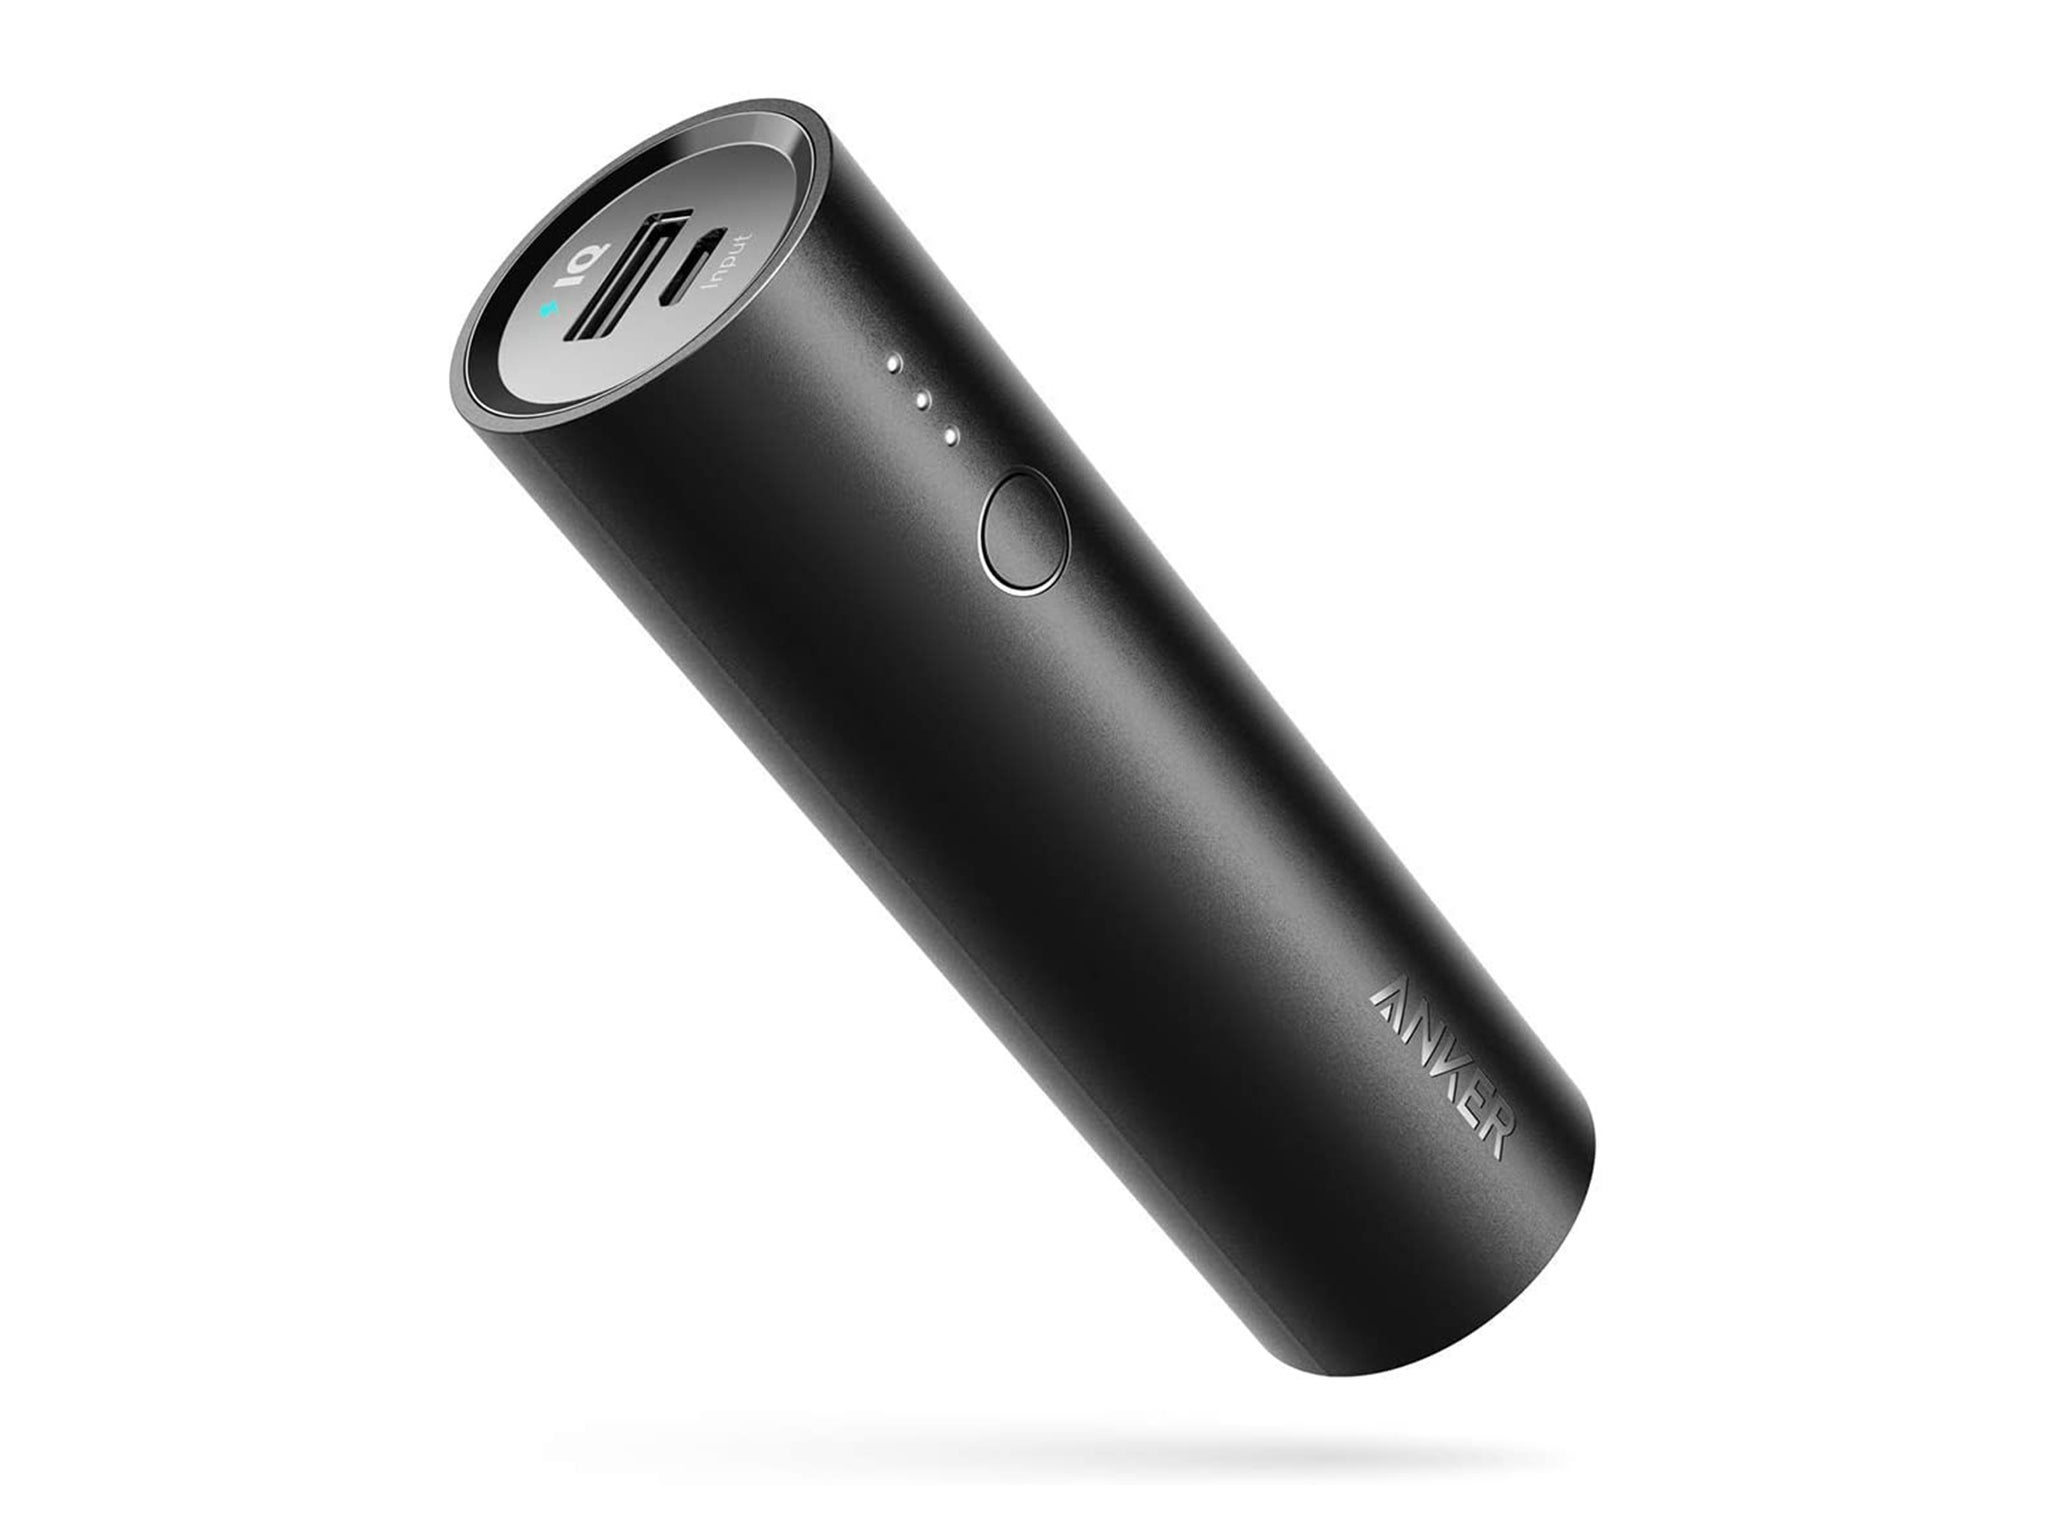 anker-powercore-5000-portable-charger.jpg